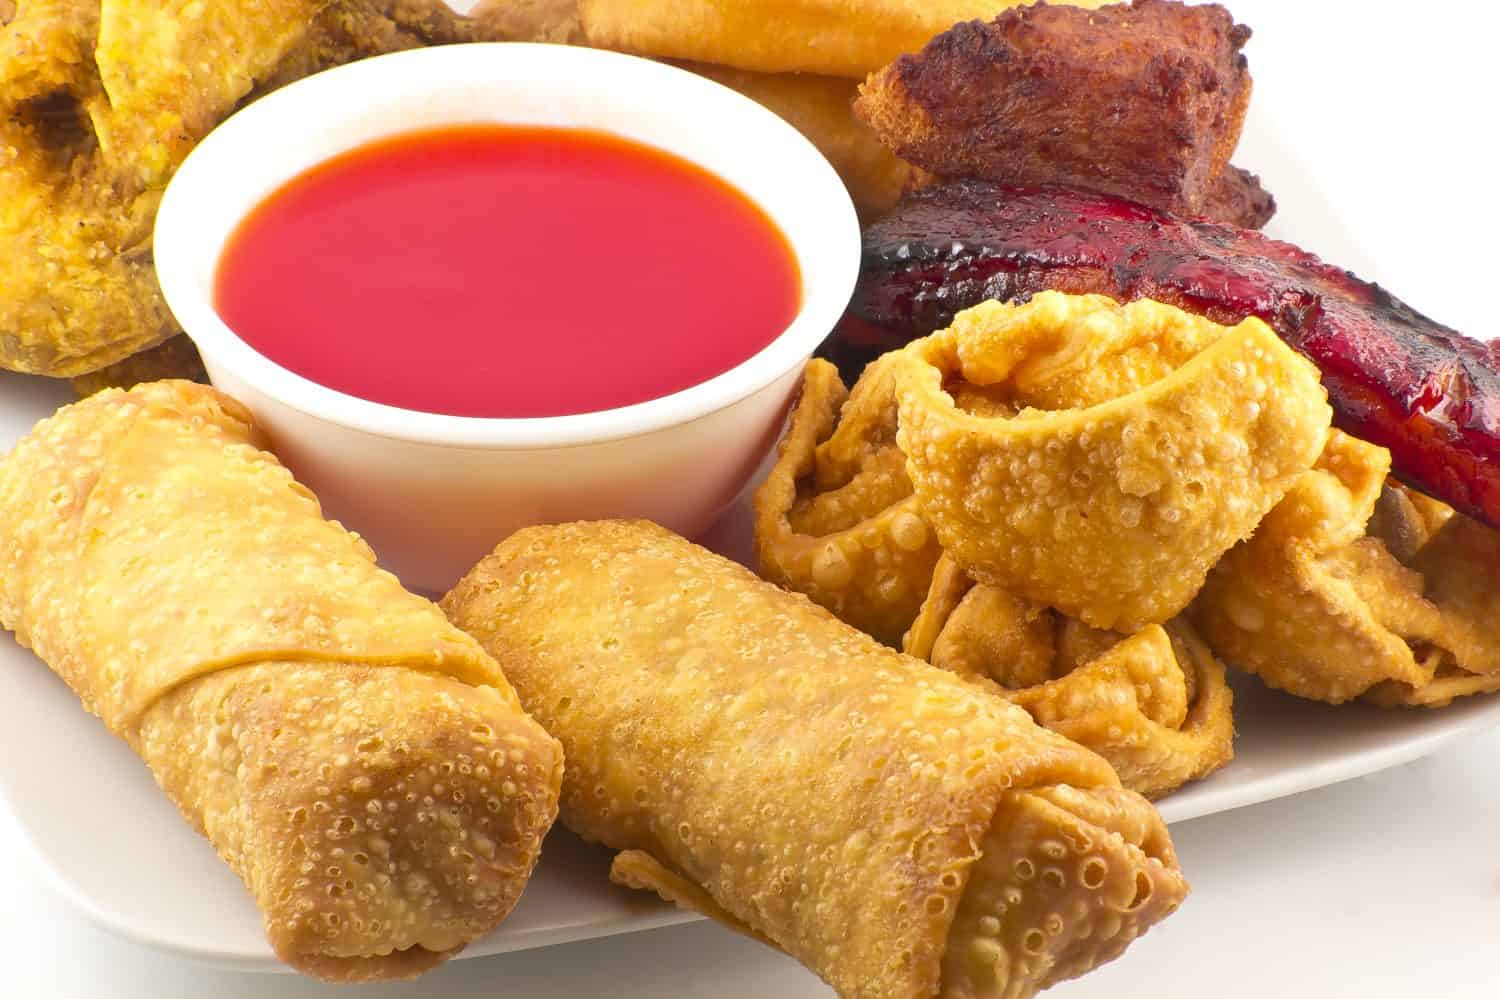 Pu pu platter with crab rangoon, egg rolls, fried chicken, BBQ Beef sticks, and fried wontons with sweet sauce